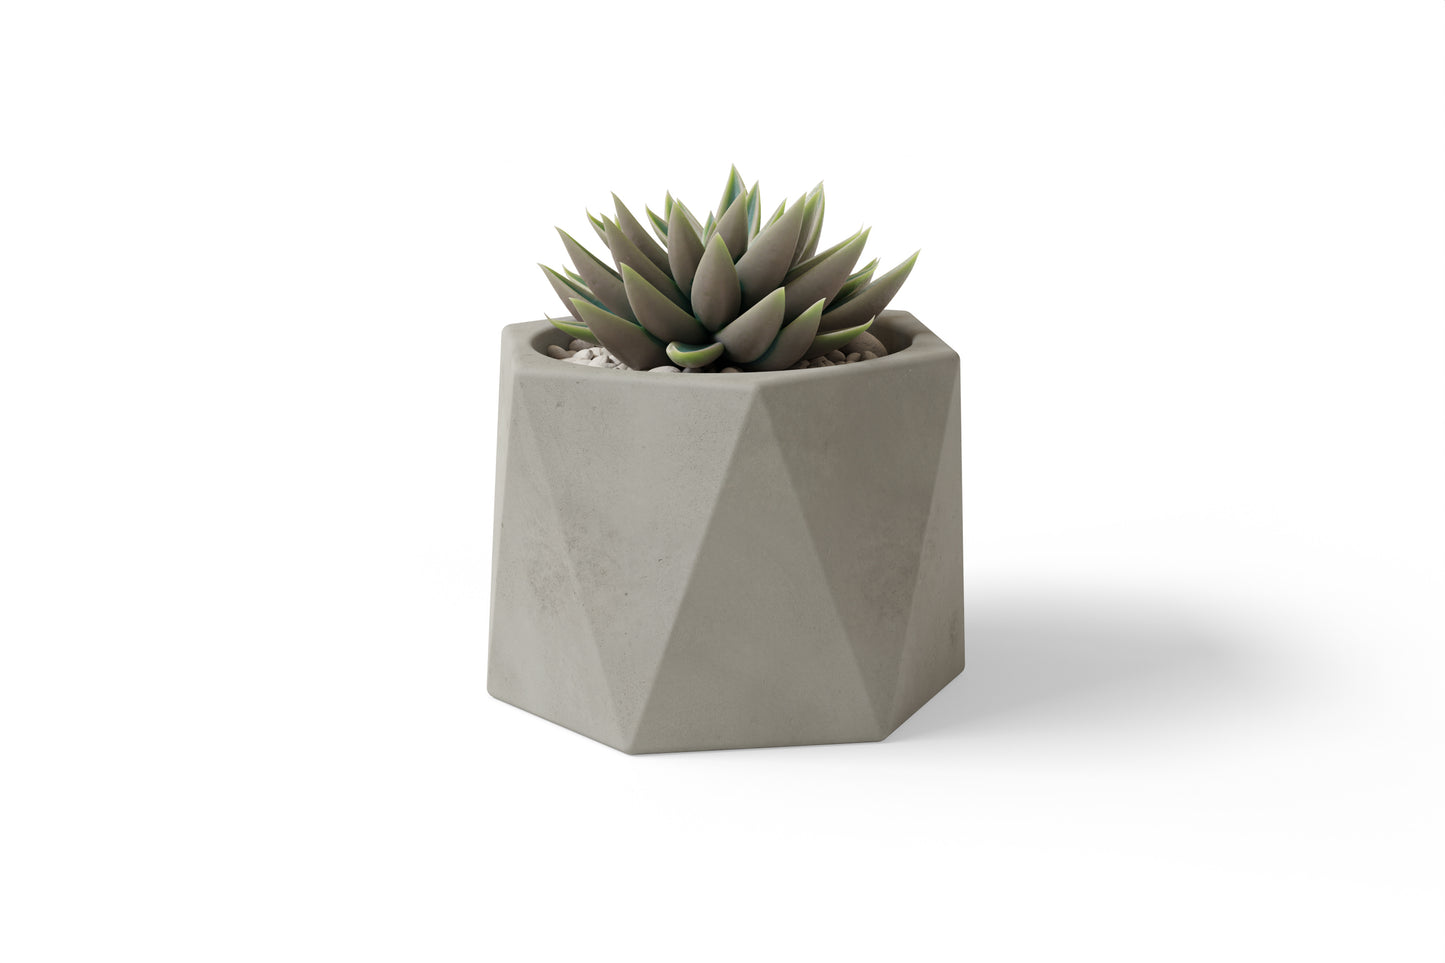 Avera Stone Cement Dodecagon Planter 5" - Natural - Made in the USA